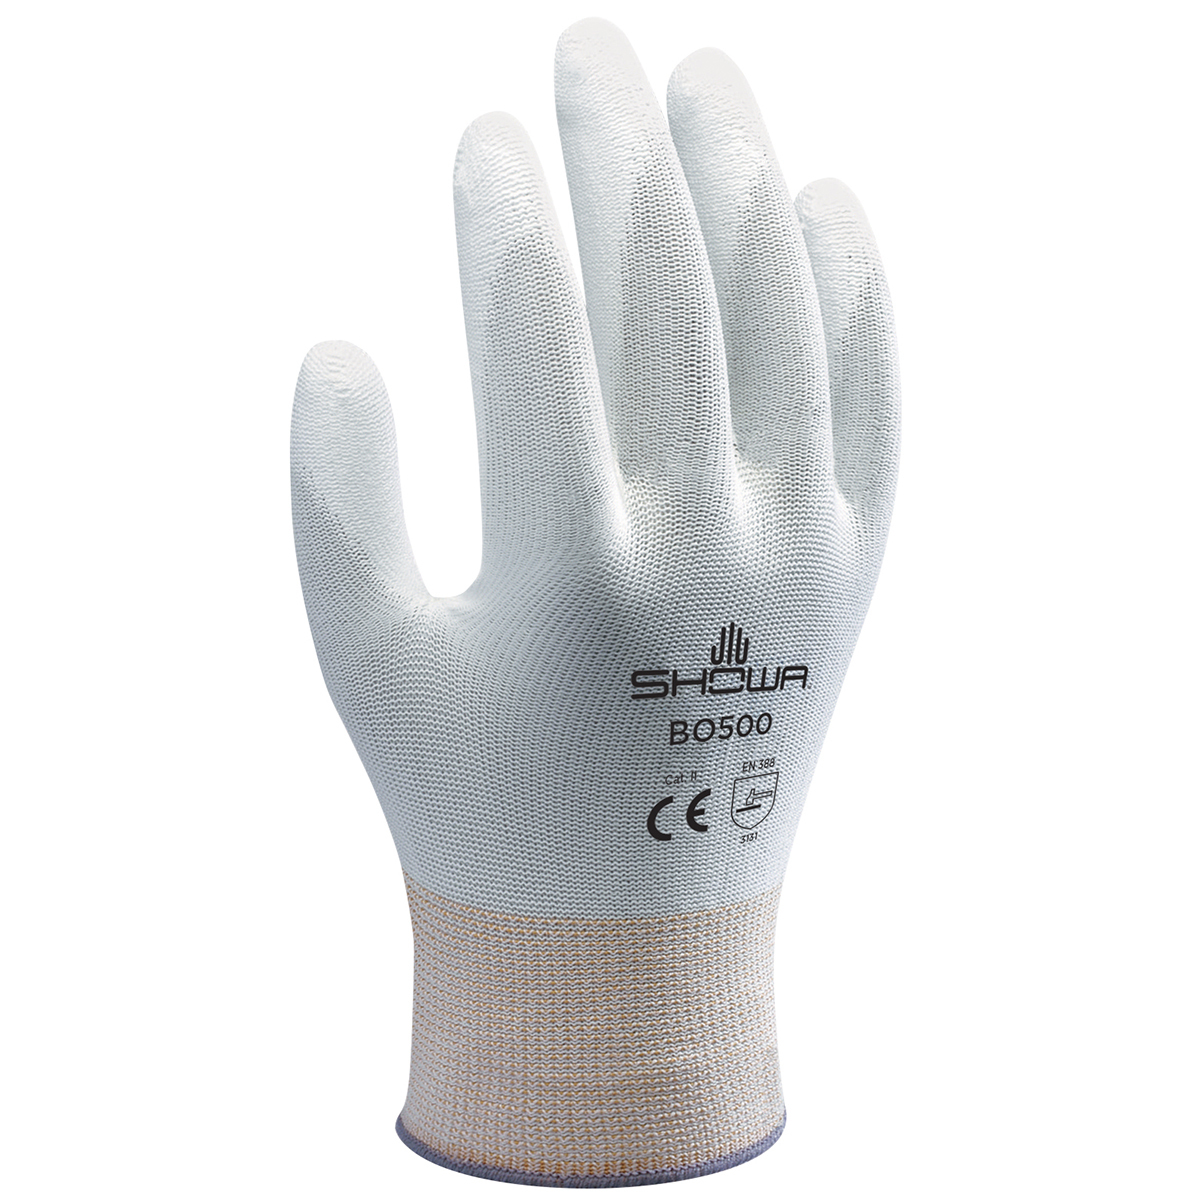 SHOWA® 13 Gauge Polyurethane Palm Coated Work Gloves With Nylon Knit Liner And Knit Wrist